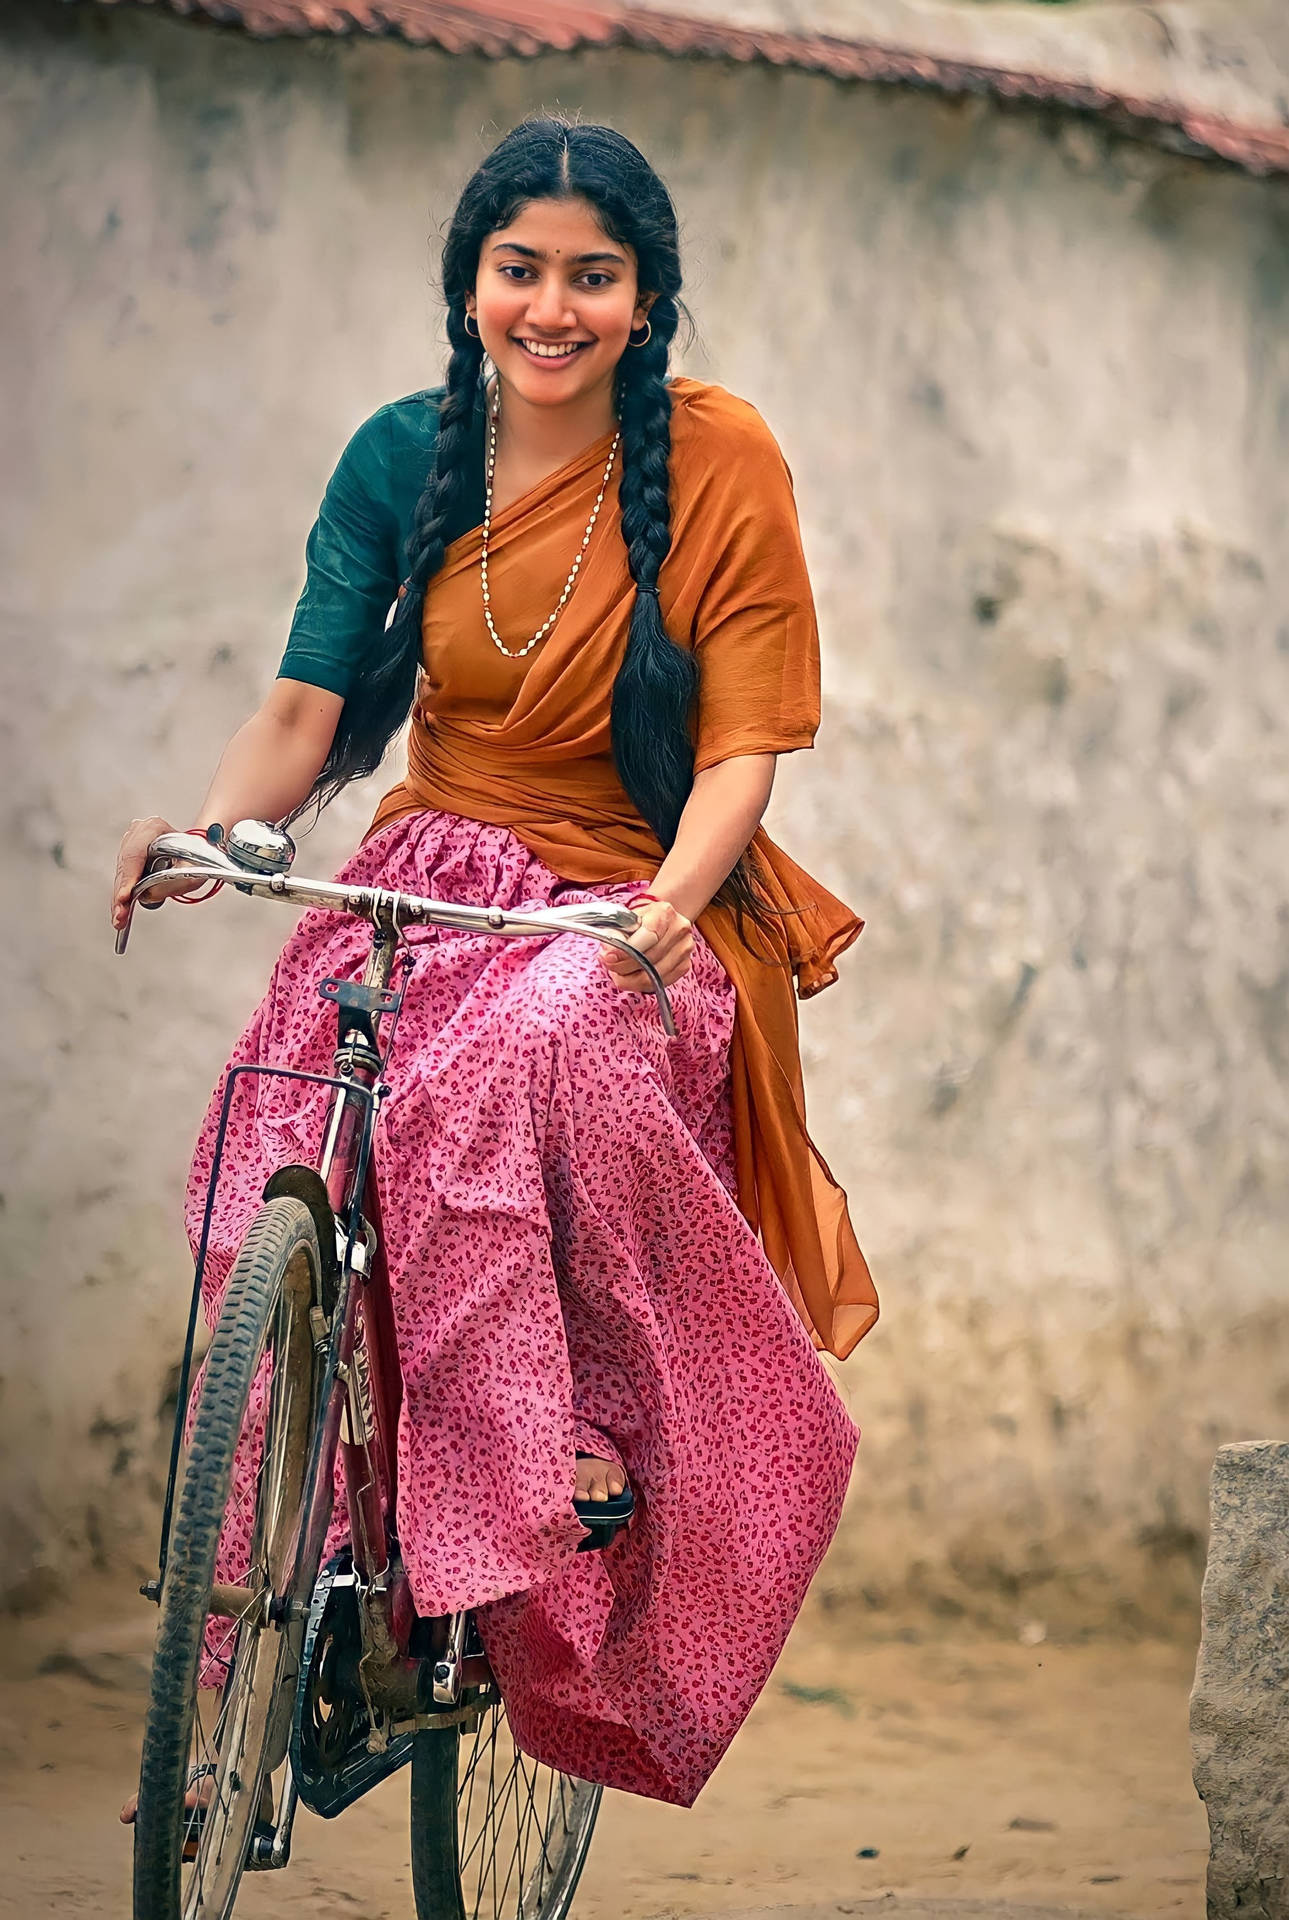 Sai Pallavi - Authentic Beauty With Elegance Background